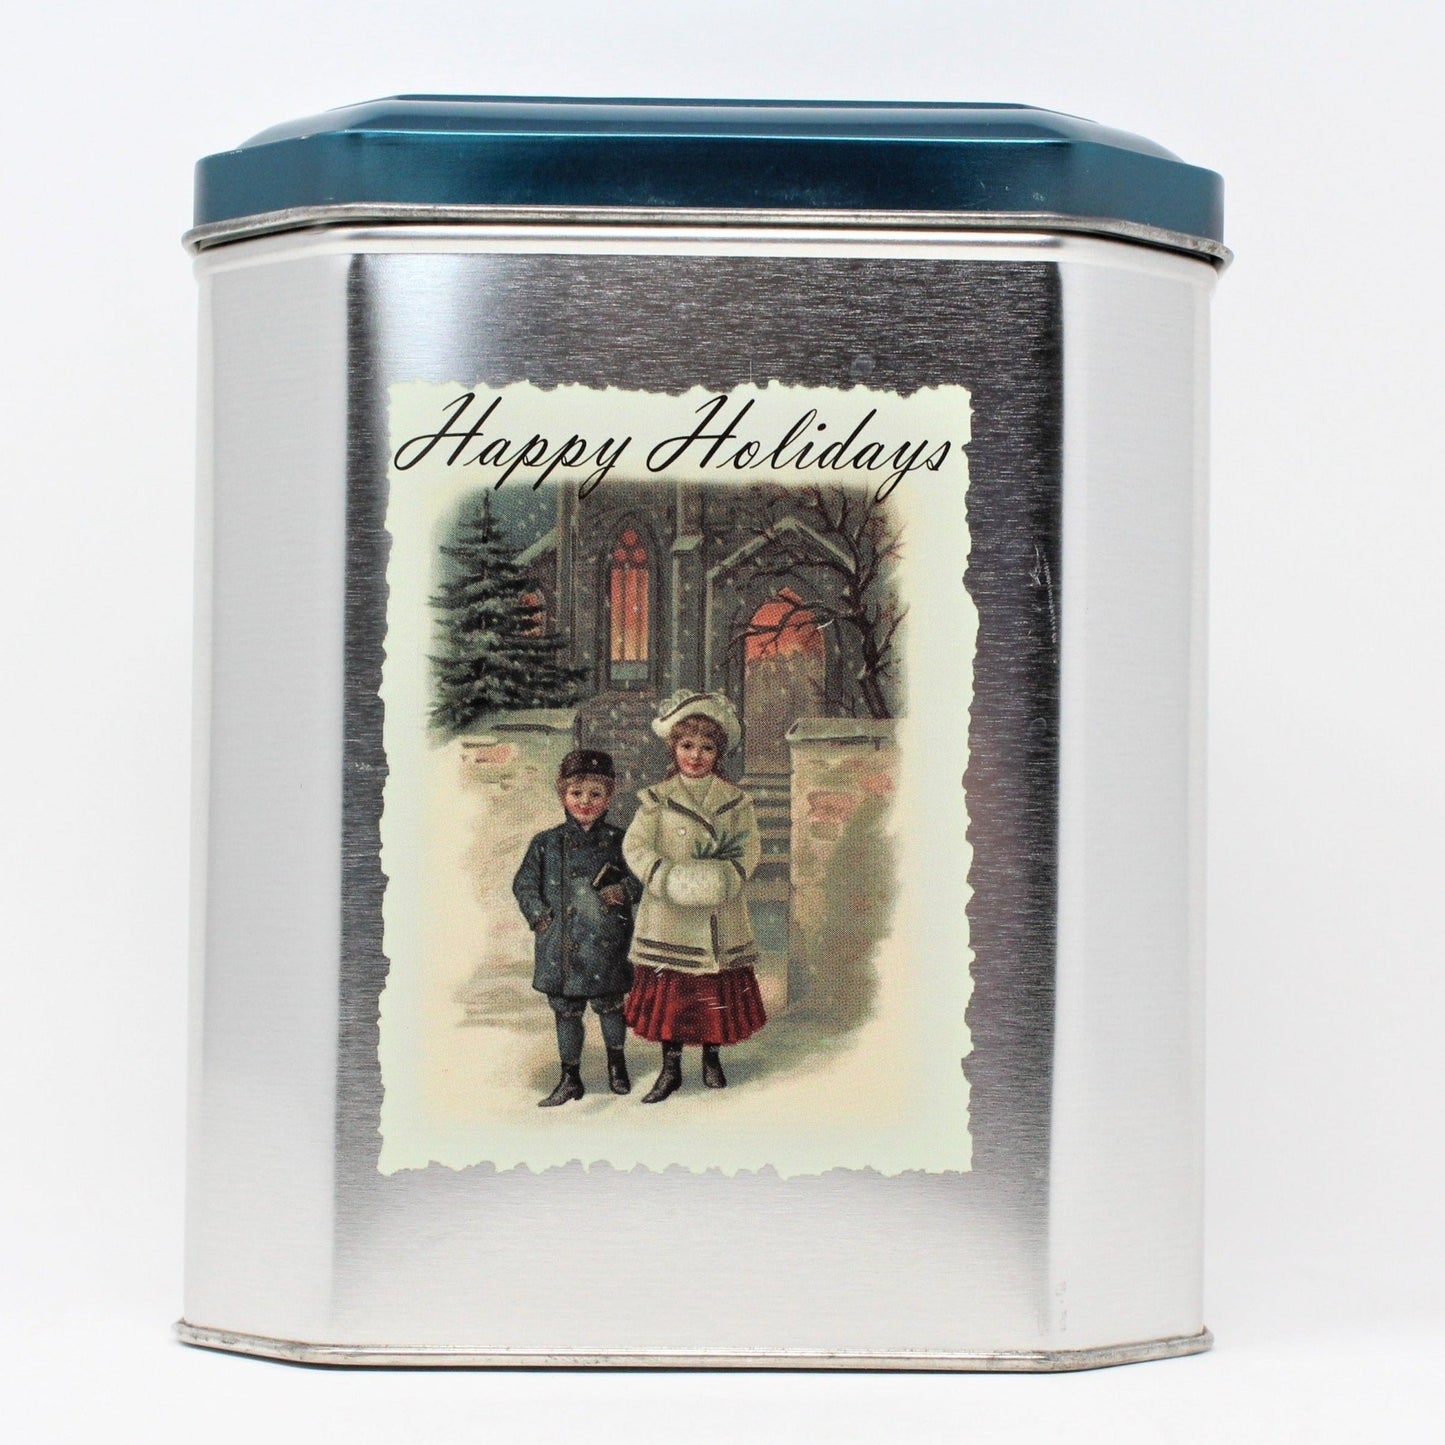 Gift Tin / Cookie Tin, Happy Holidays, Victorian Children, Teal Blue, Square